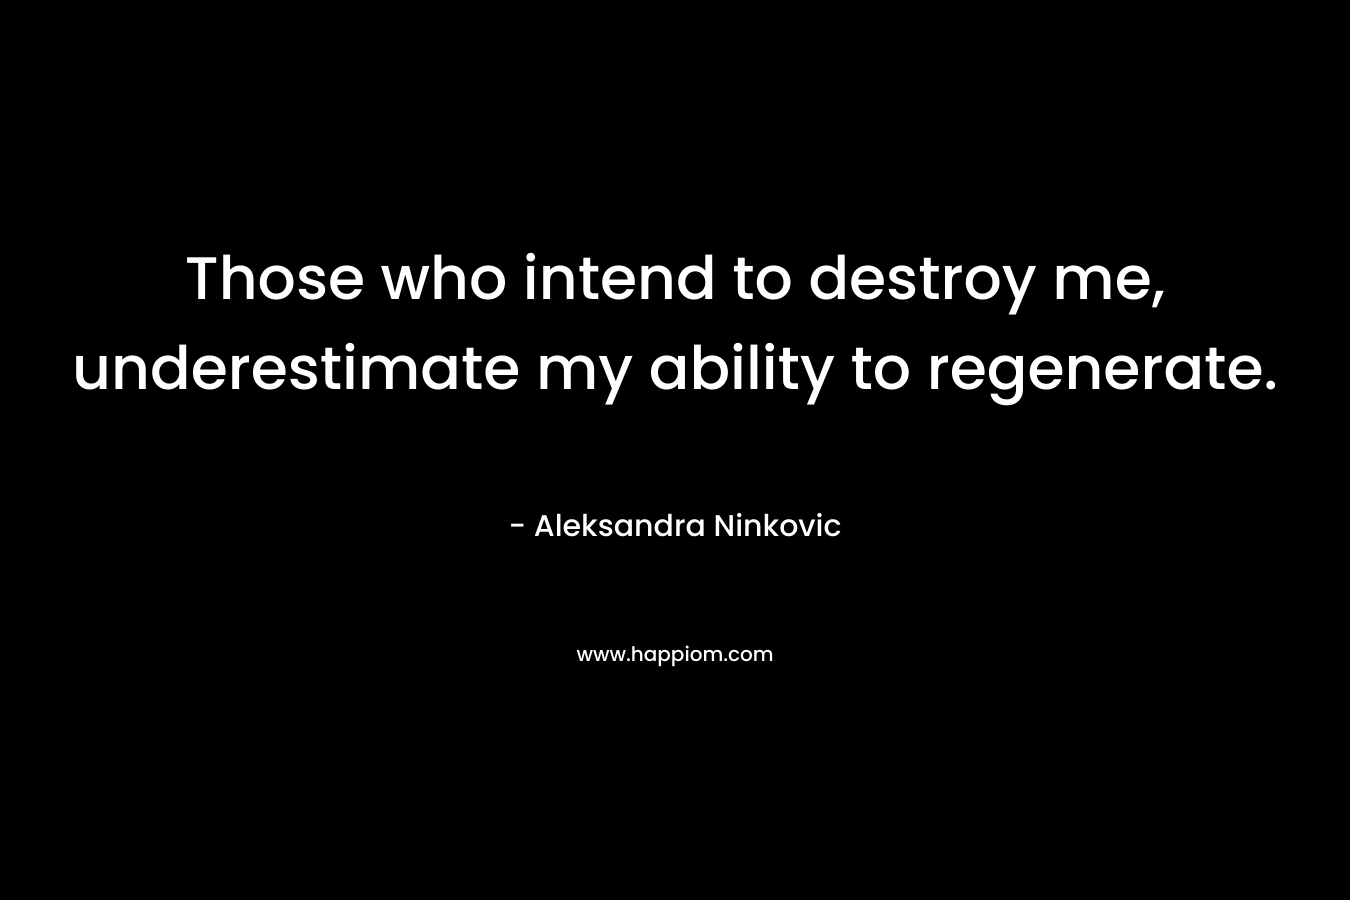 Those who intend to destroy me, underestimate my ability to regenerate.